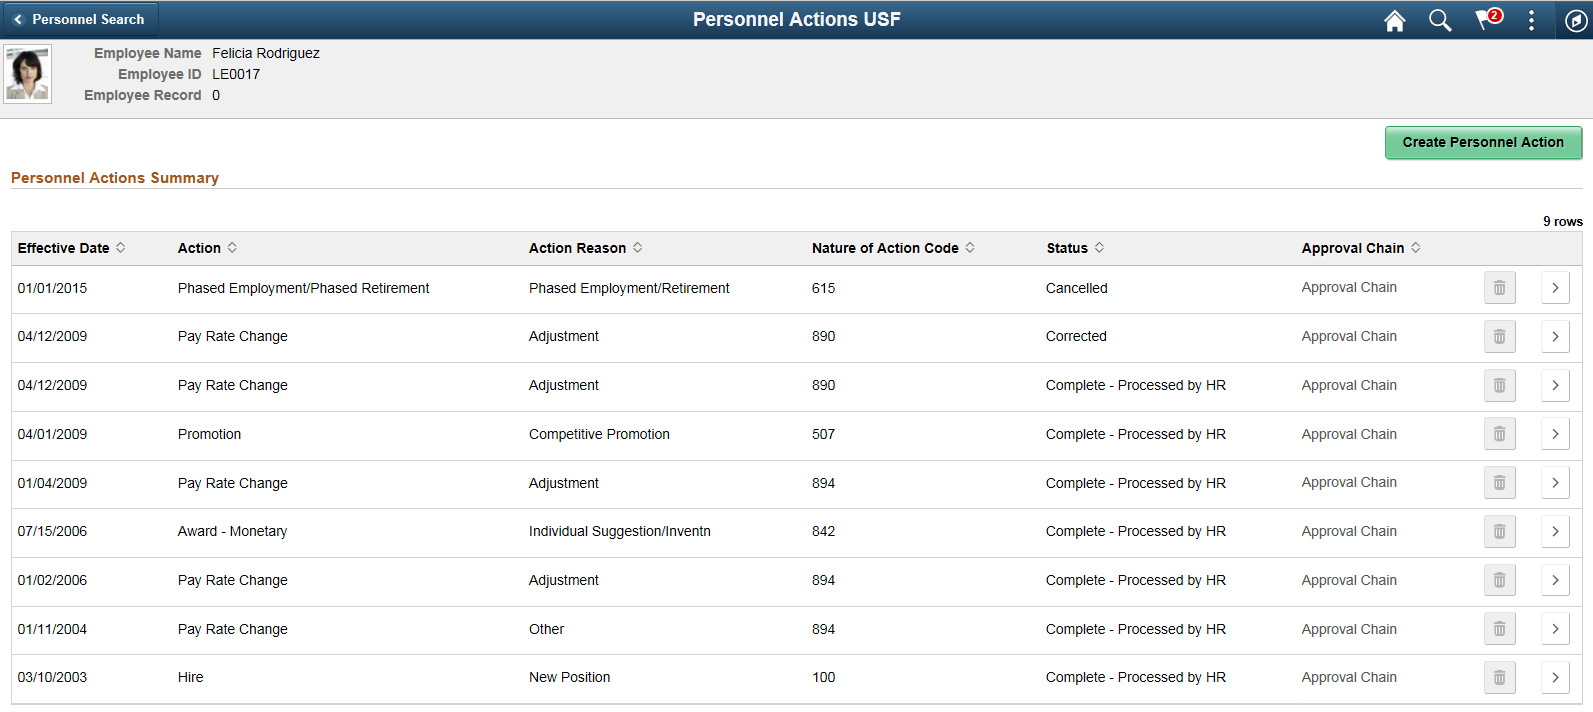 Personnel Actions USF page